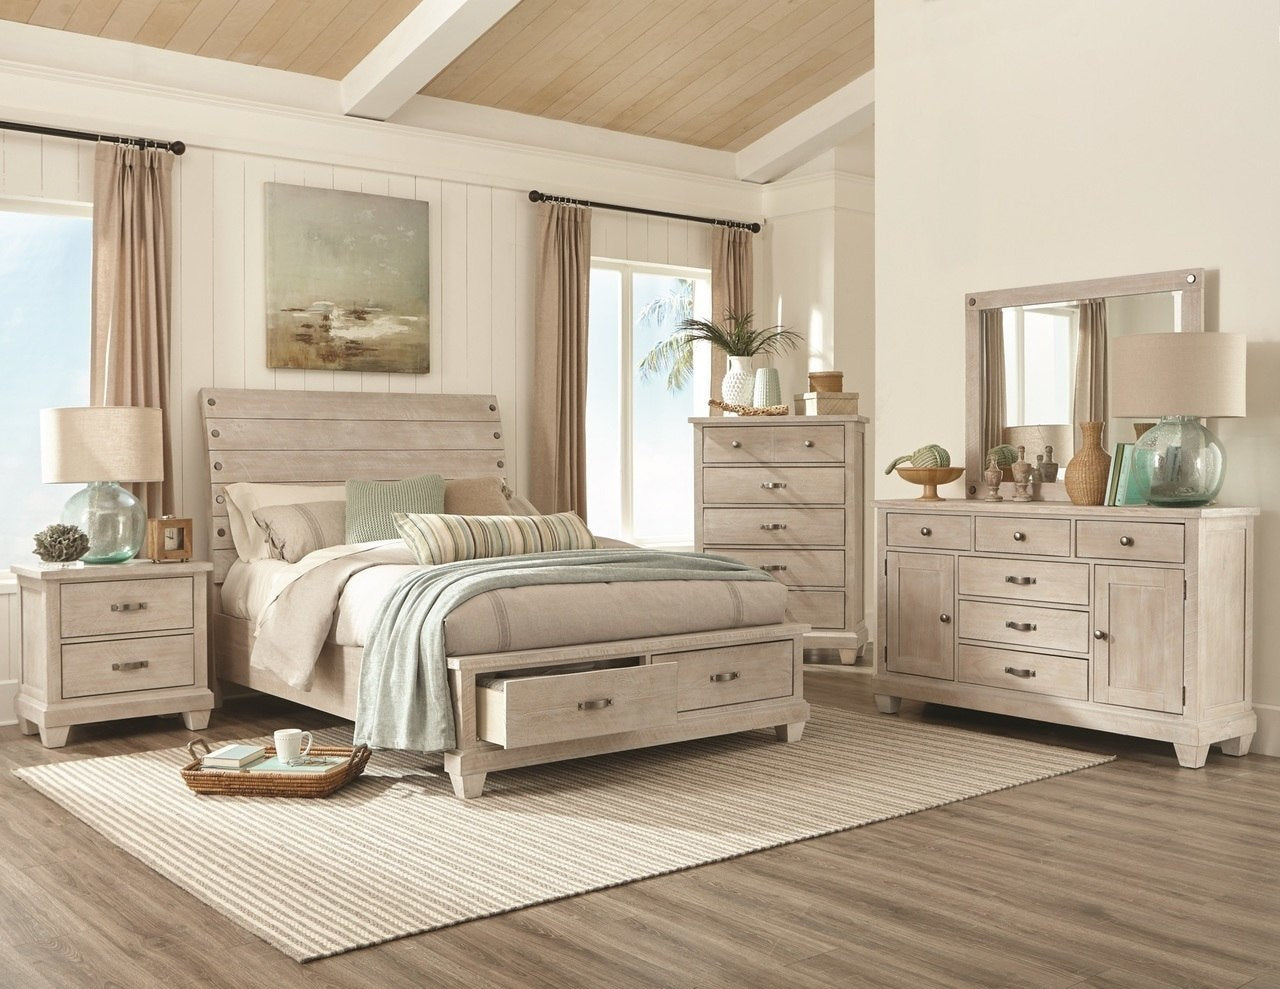 White Wash Country King Bedroom Set